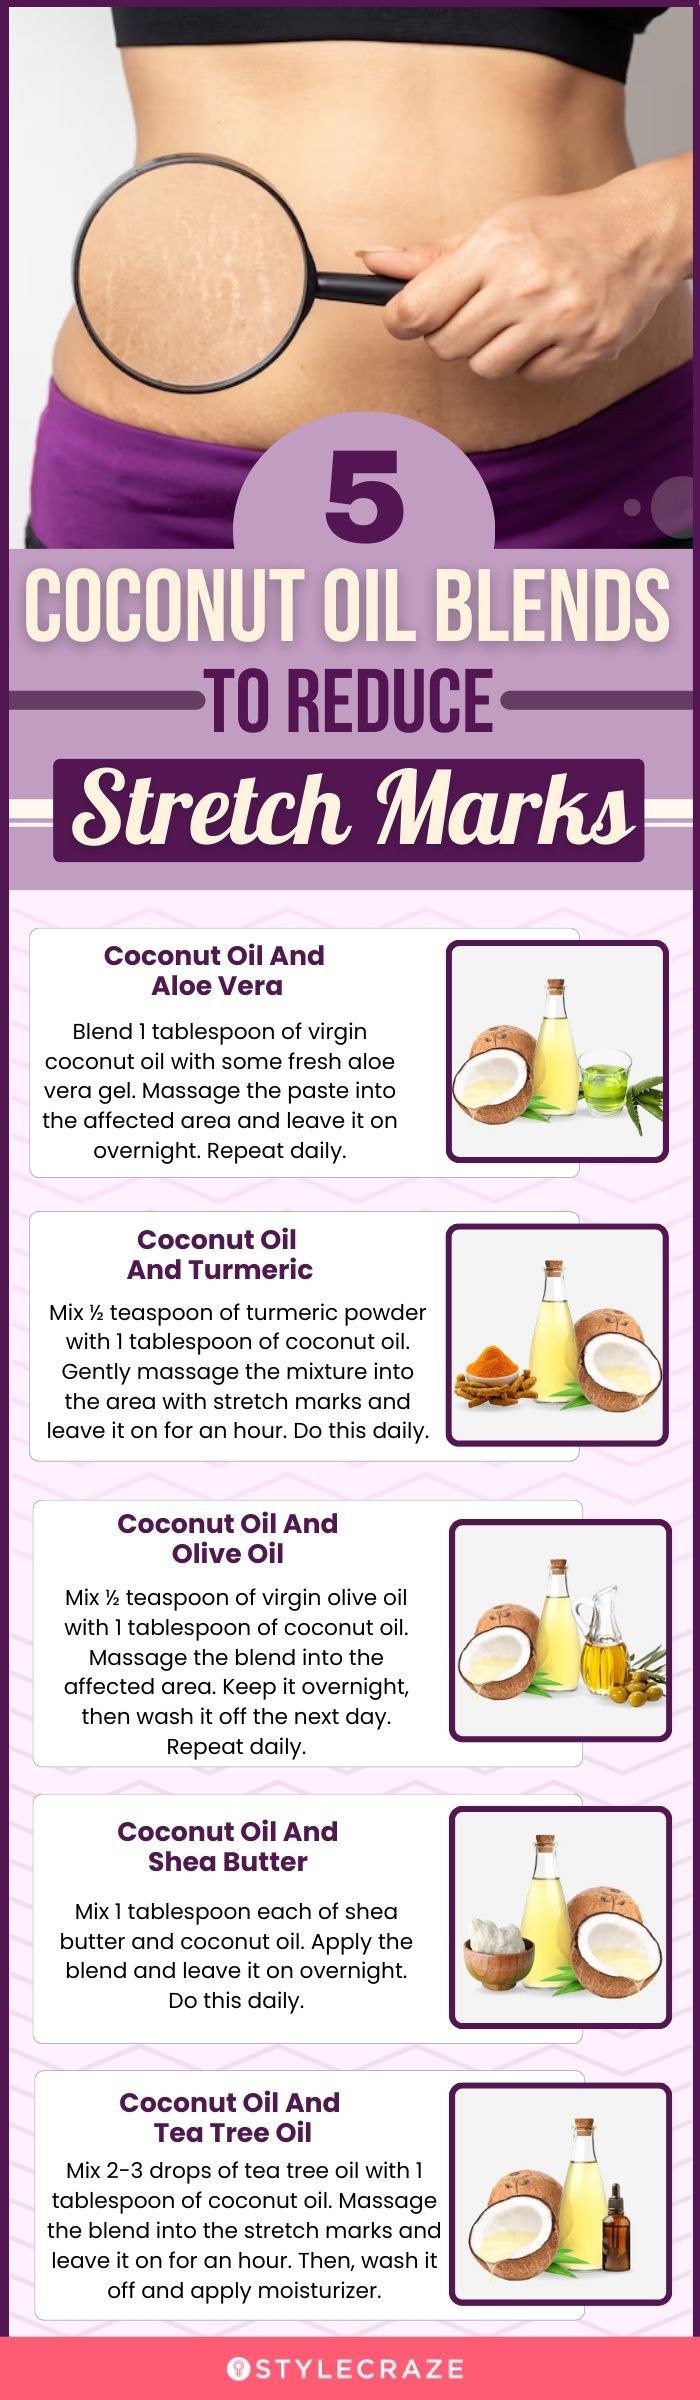 5 coconut oil blends to reduce stretch marks (infographic)